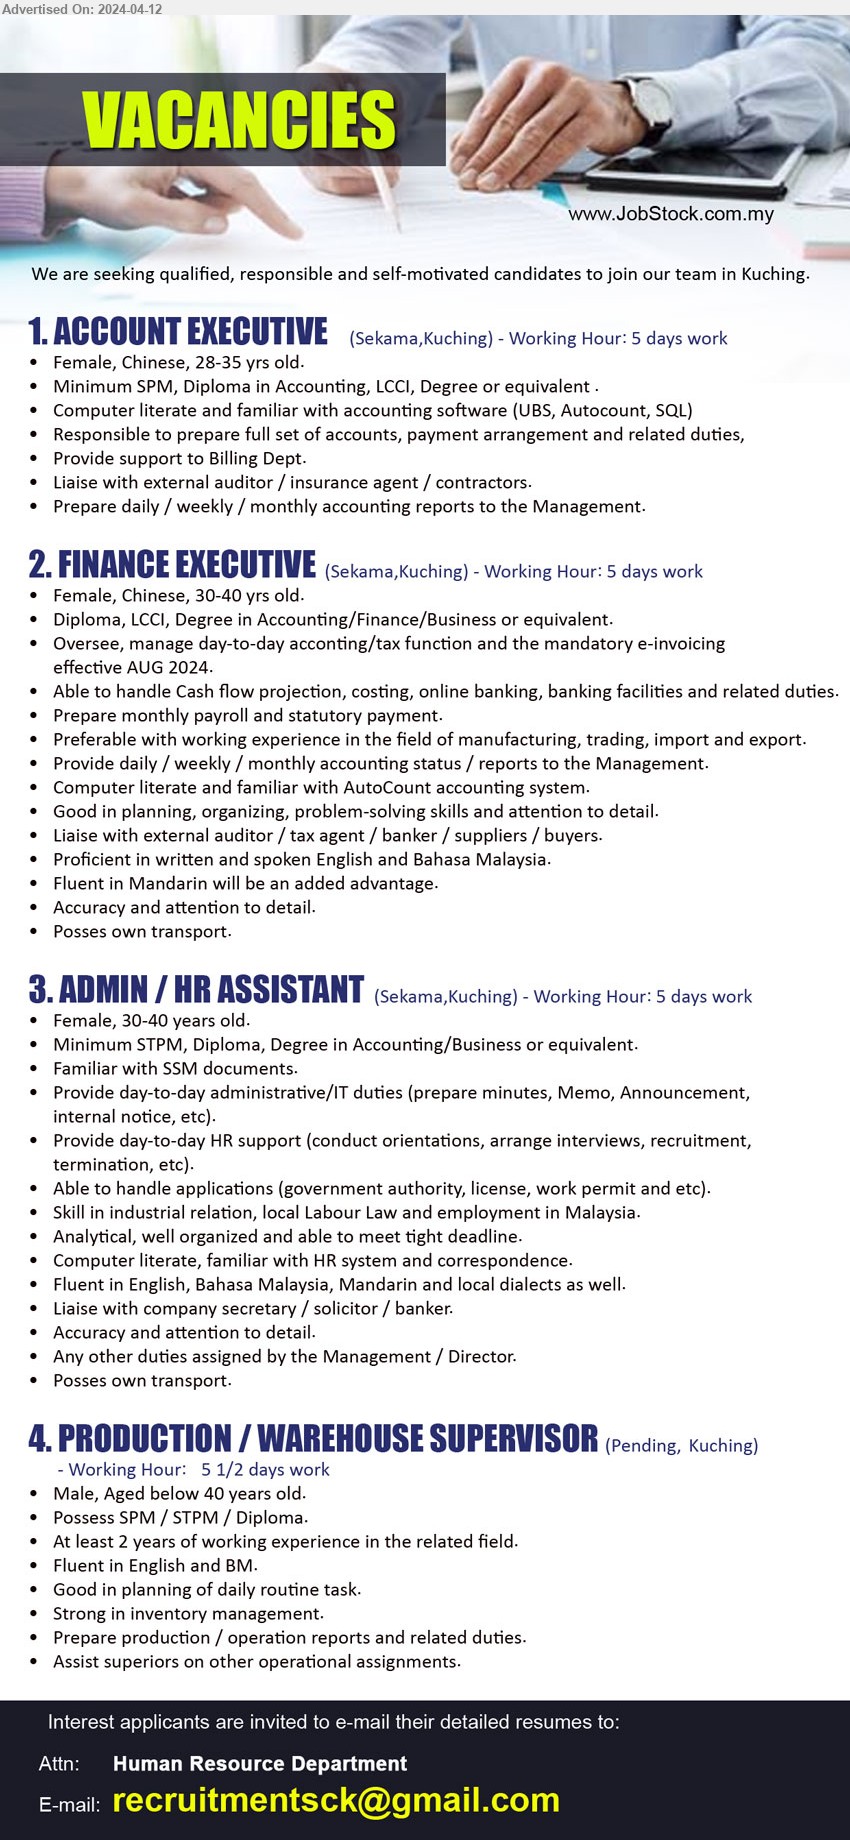 ADVERTISER - 1. ACCOUNT EXECUTIVE  (Kuching), SPM, Diploma in Accounting, LCCI, Degree, Computer literate and familiar with accounting software (UBS, Autocount, SQL),...
2. FINANCE EXECUTIVE (Kuching), 	Diploma, LCCI, Degree in Accounting/Finance/Business,versee, manage day-to-day acconting/tax function and the mandatory e-invoicing effective AUG 2024.,...
3. ADMIN / HR ASSISTANT (Kuching), STPM, Diploma, Degree in Accounting/Business, Familiar with SSM document,...
4. PRODUCTION / WAREHOUSE SUPERVISOR (Kuching), SPM / STPM / Diploma, 2 yrs. exp....
Email resume to ...